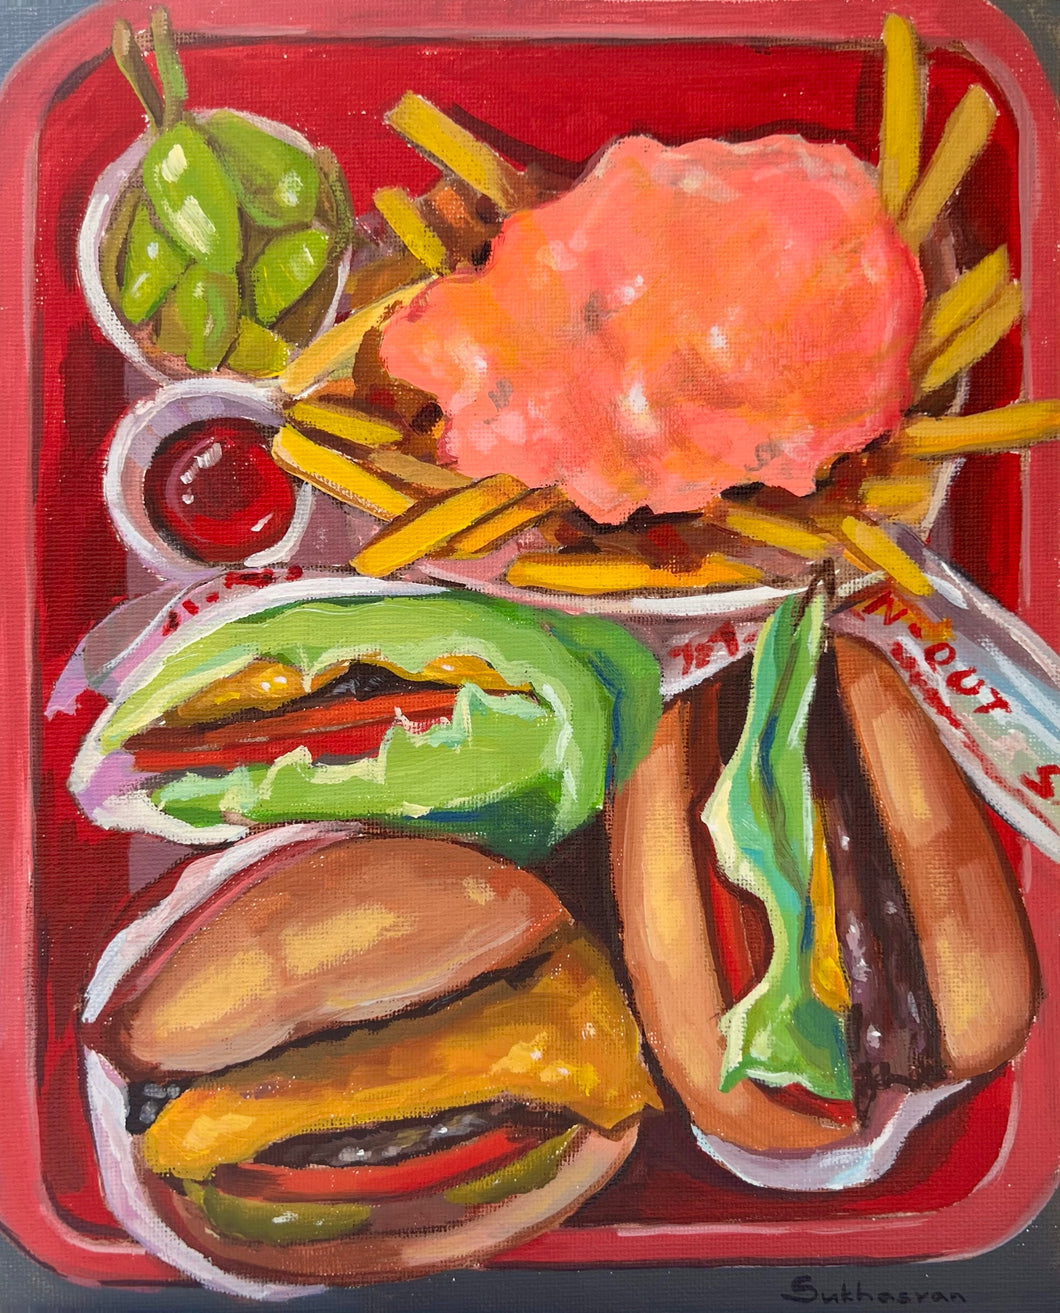 Archival giclée print of the Original acrylic painting Still life with In-N-Out Burgers and Animal Style French Fries by Victoria Sukhasyan.